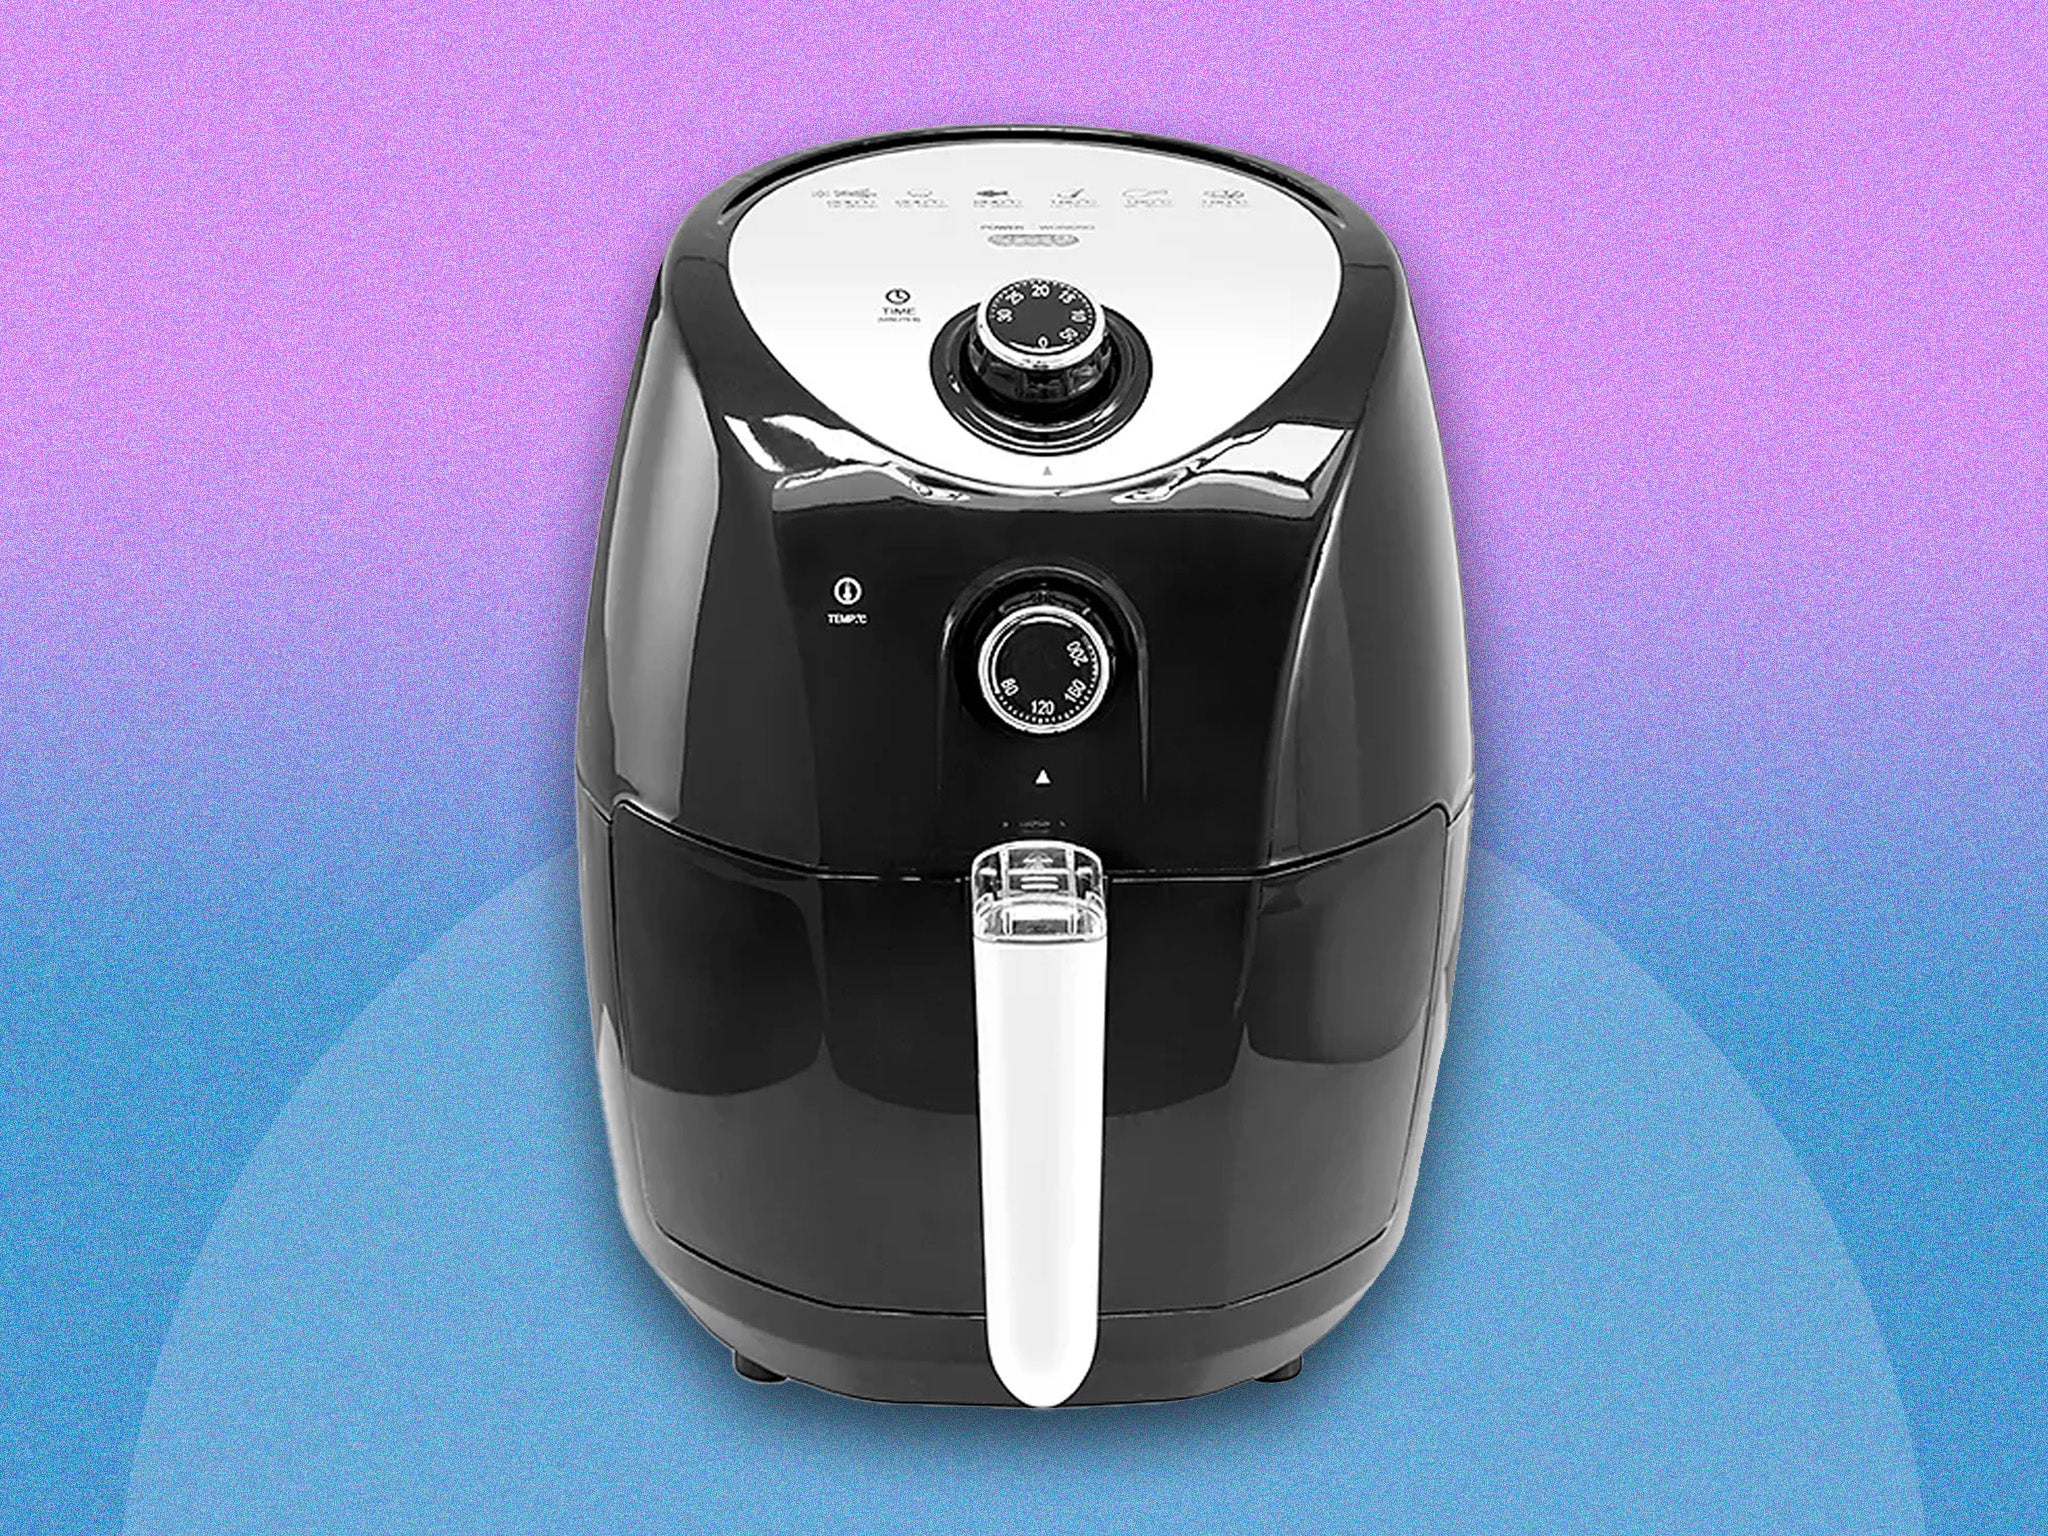 Best for solo cooks, Asda’s air fryer can house up to two portions of food